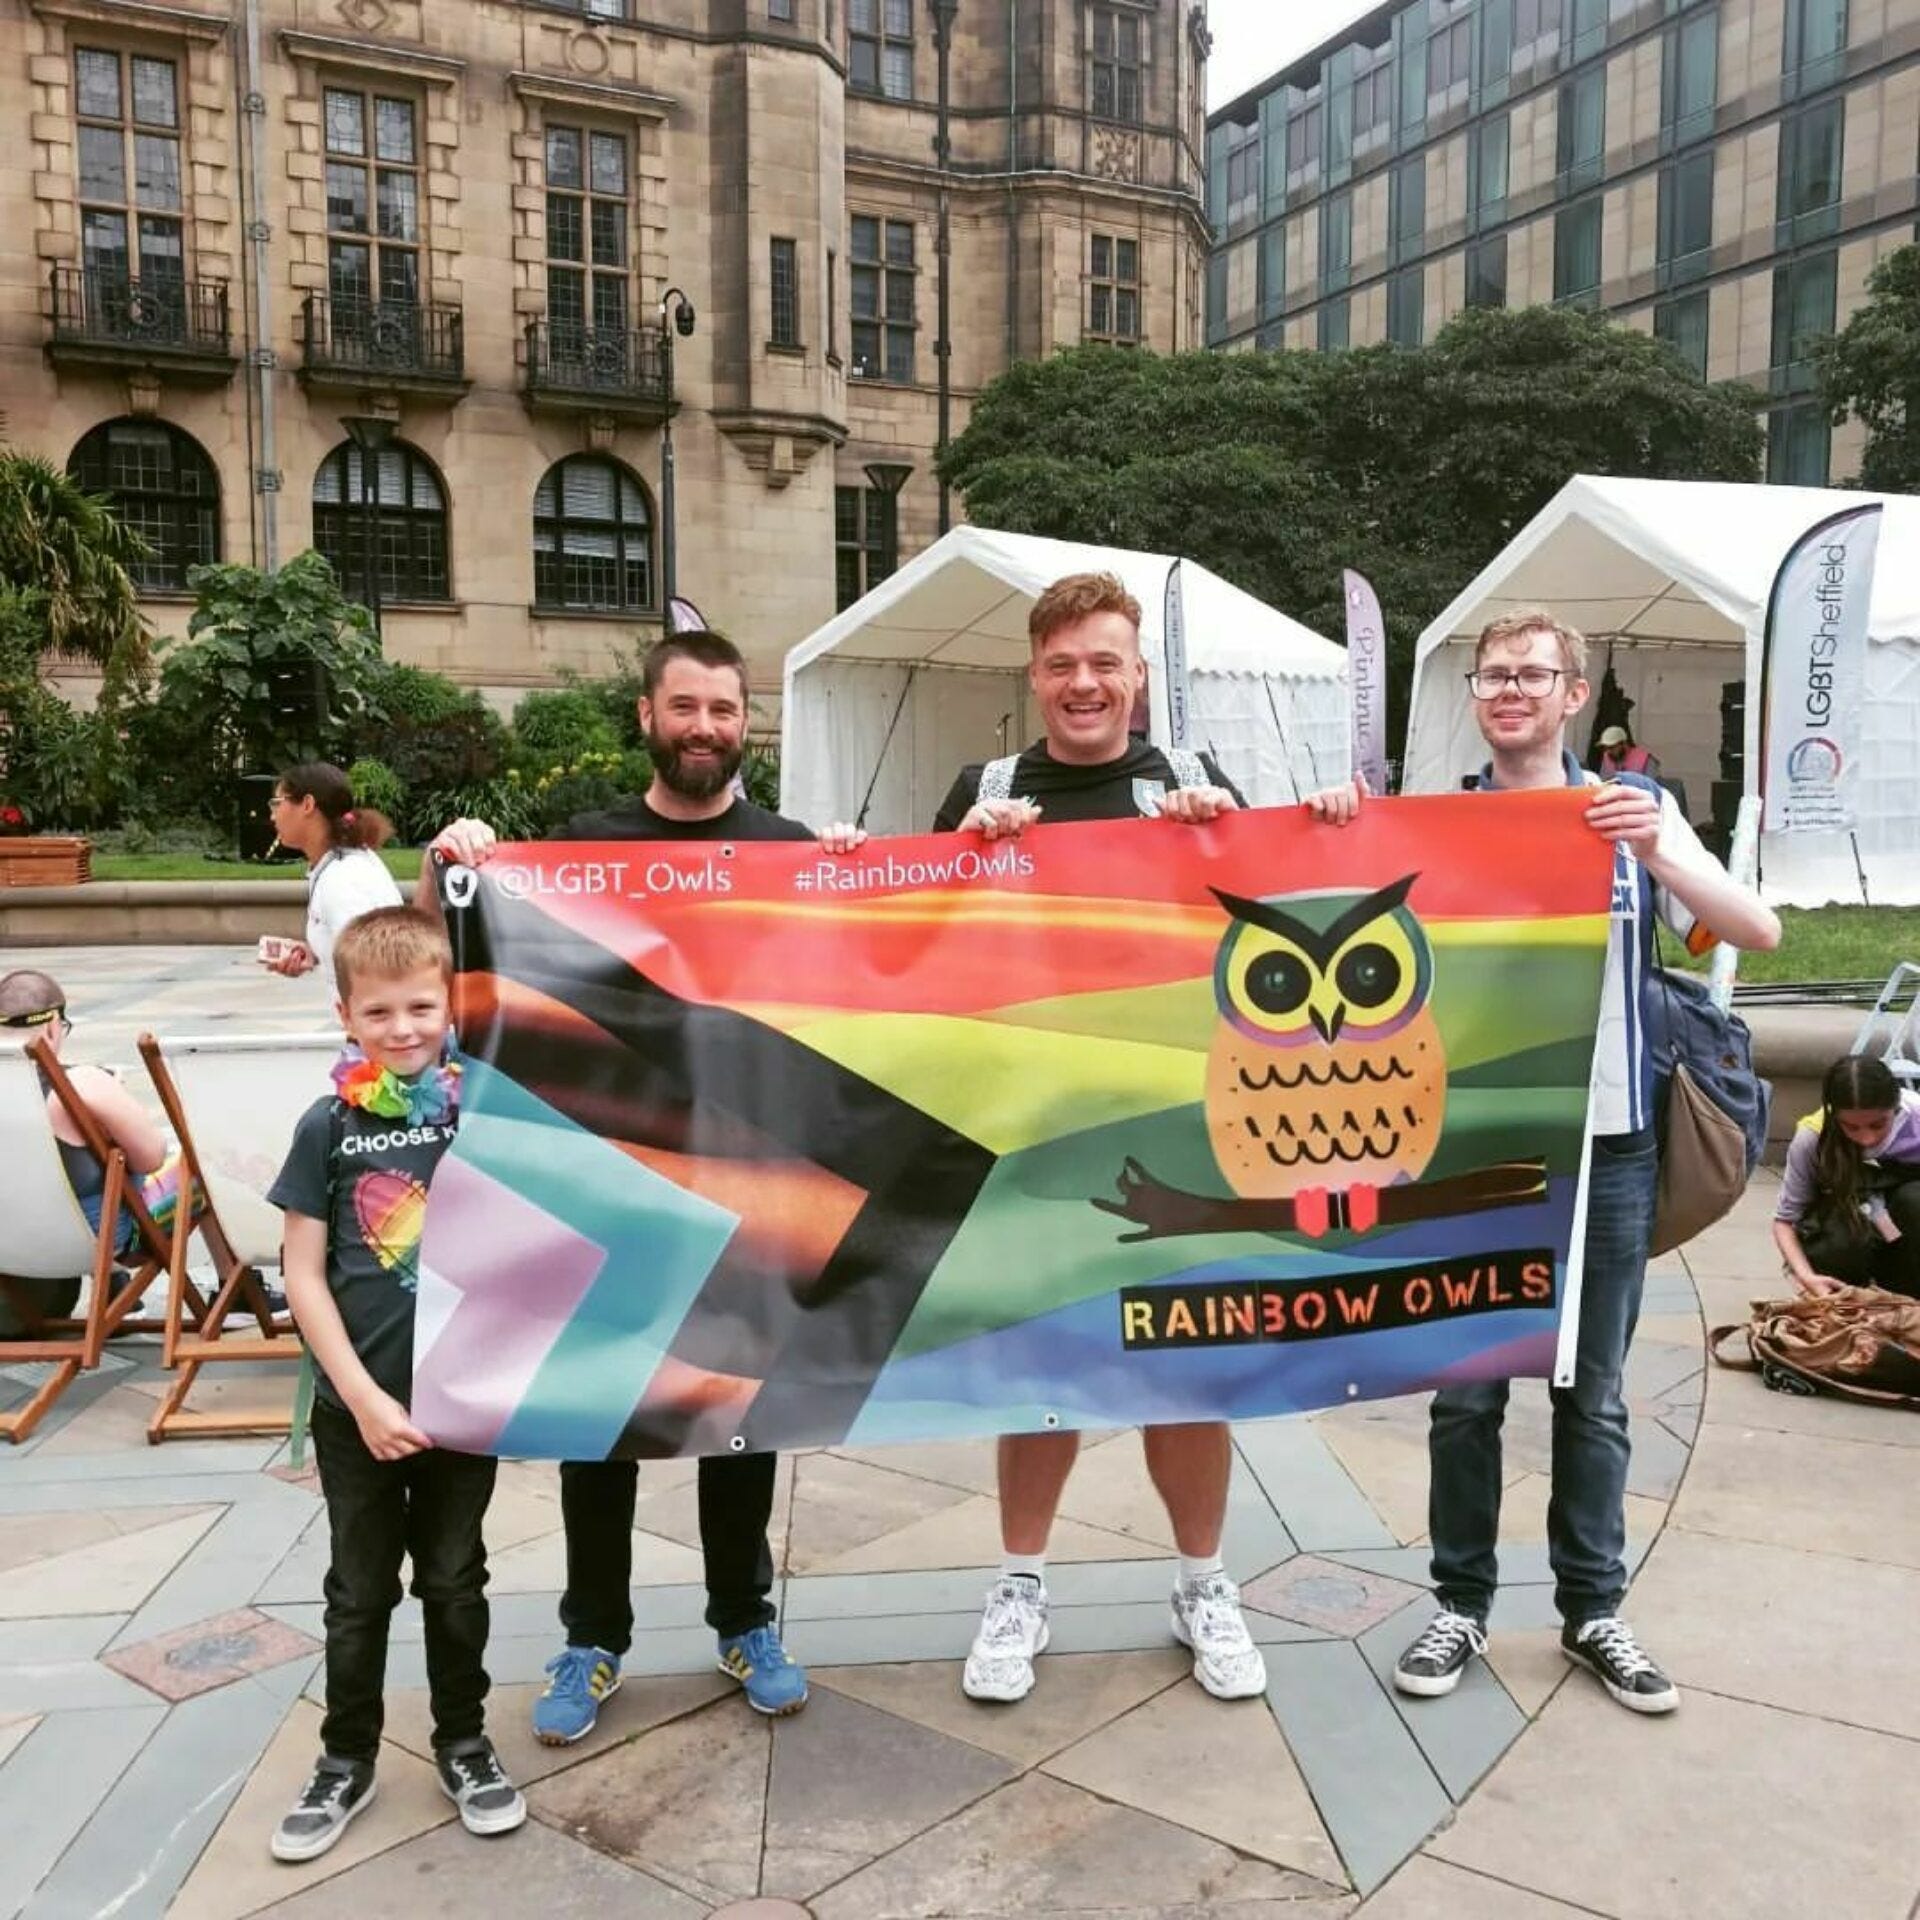 Three men and a boy hold up a Pride Progress flag with the rainbow owls logo printed on it.